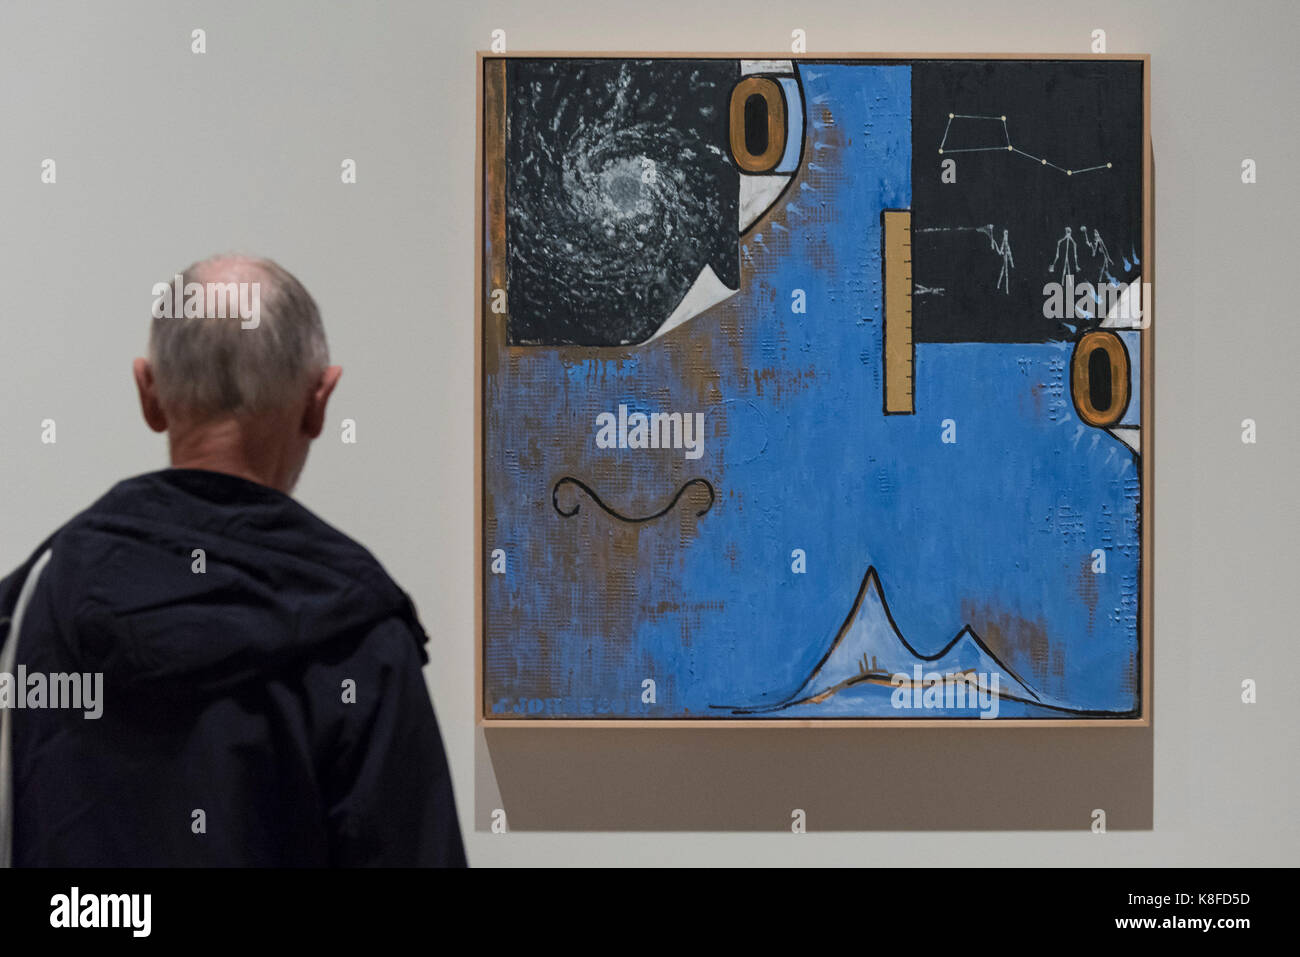 London, UK.  19 September 2017.  A visitor views 'Untitled', 2016, by Jasper Johns.  Preview of a landmark exhibition by Jasper Johns RA called 'Something Resembling Truth' at the Royal Academy of Arts in Piccadilly.  Sculptures, drawing, prints plus new works are on display 25 September to 10 December 2017.  Credit: Stephen Chung / Alamy Live News Stock Photo